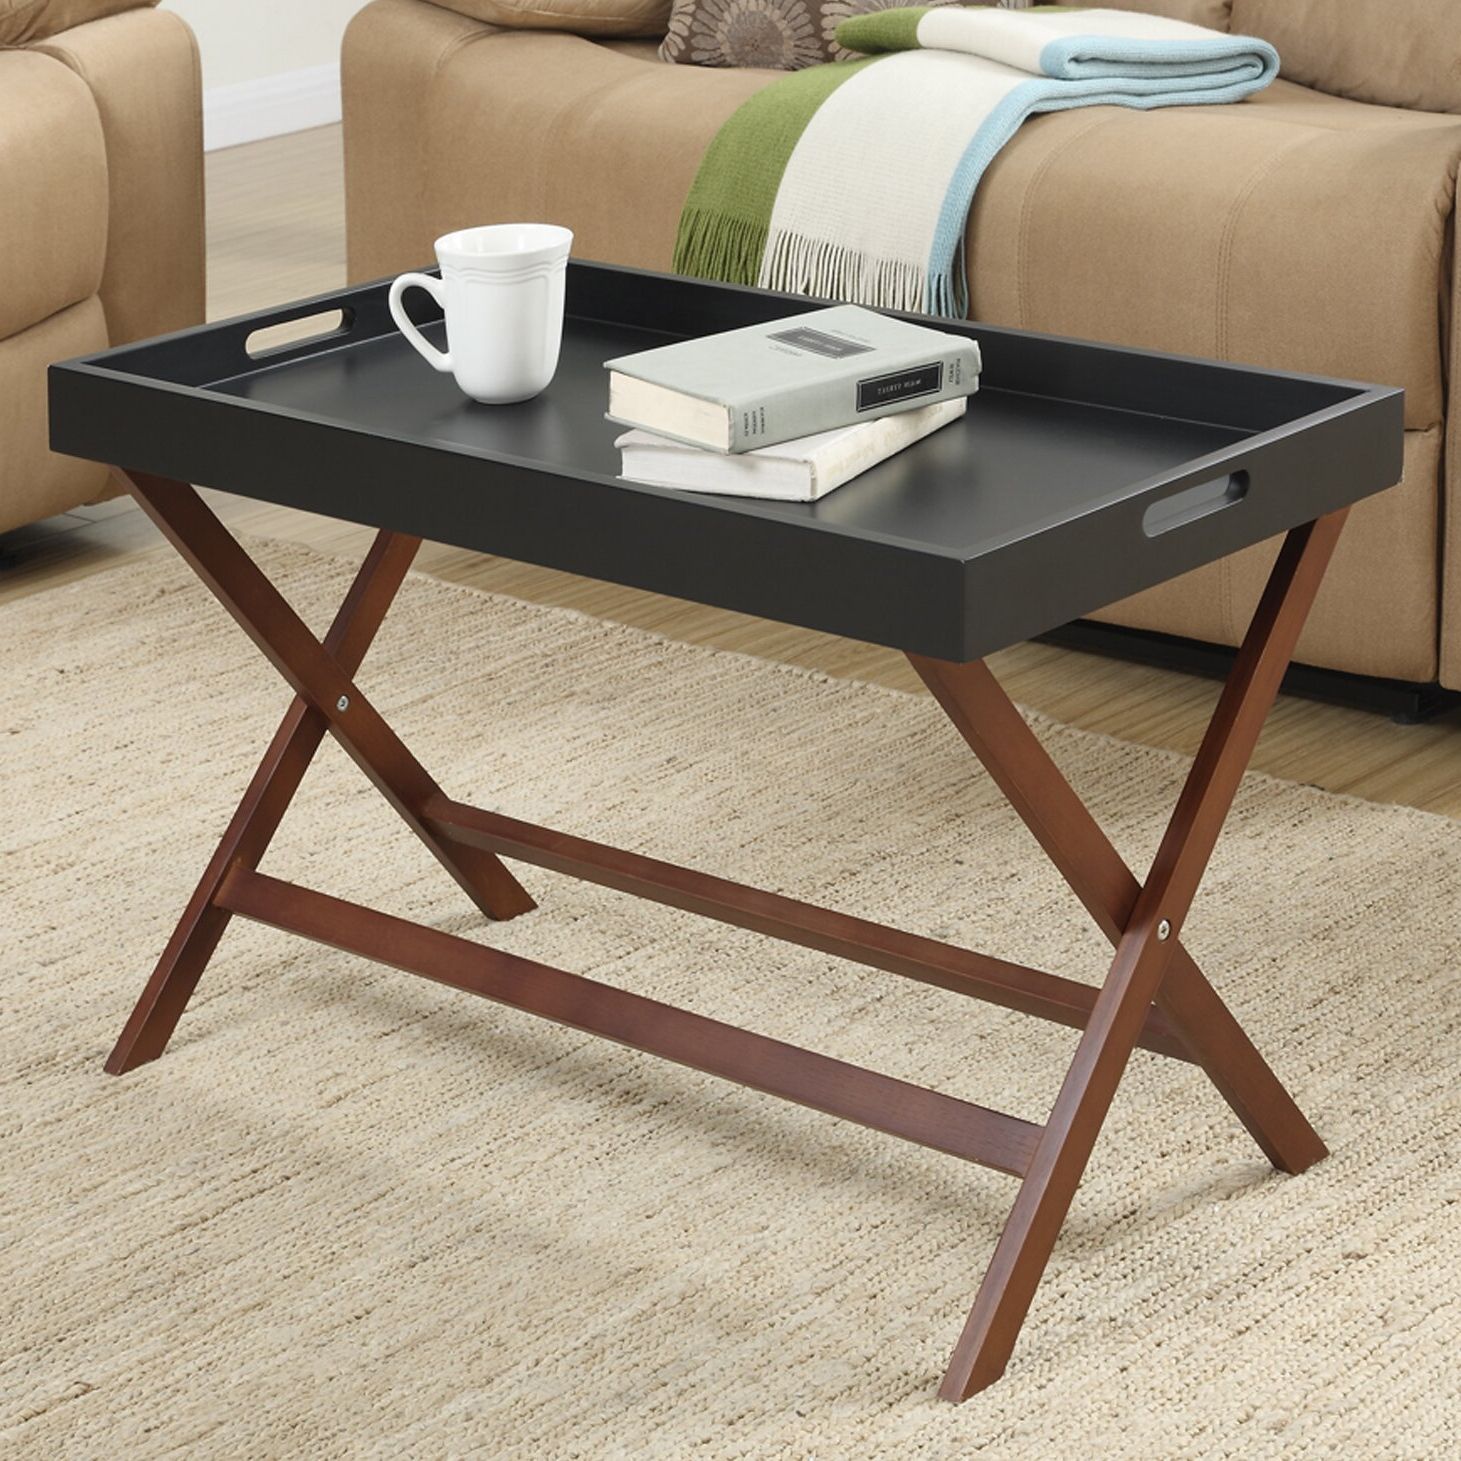 Andover Mills Lockheart Coffee Table With Removable Tray & Reviews Intended For Coffee Tables With Trays (View 9 of 20)